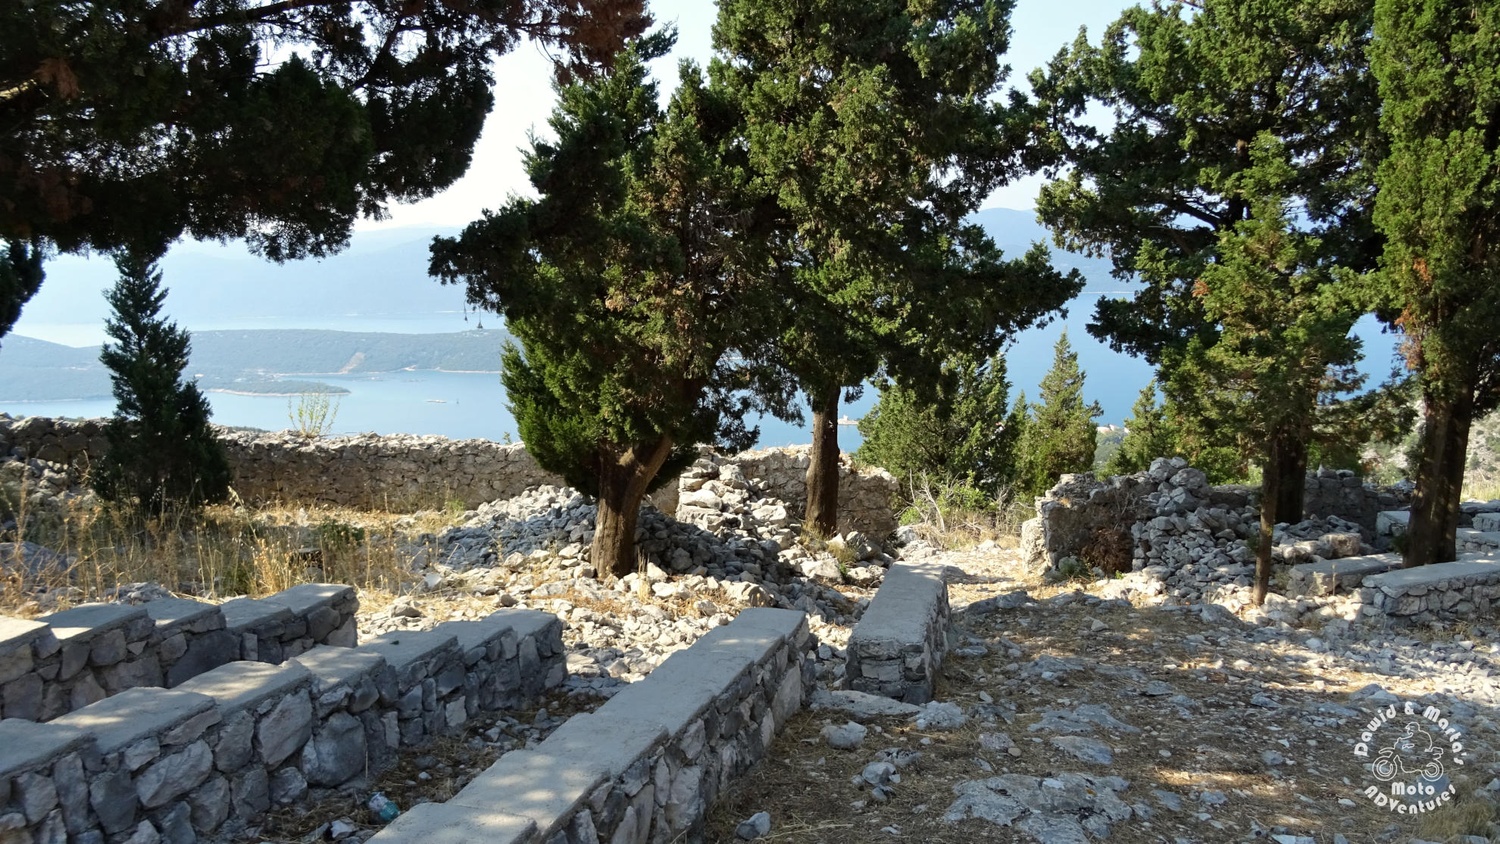 The Smrdan Grad lookout point on the Adriatic Sea